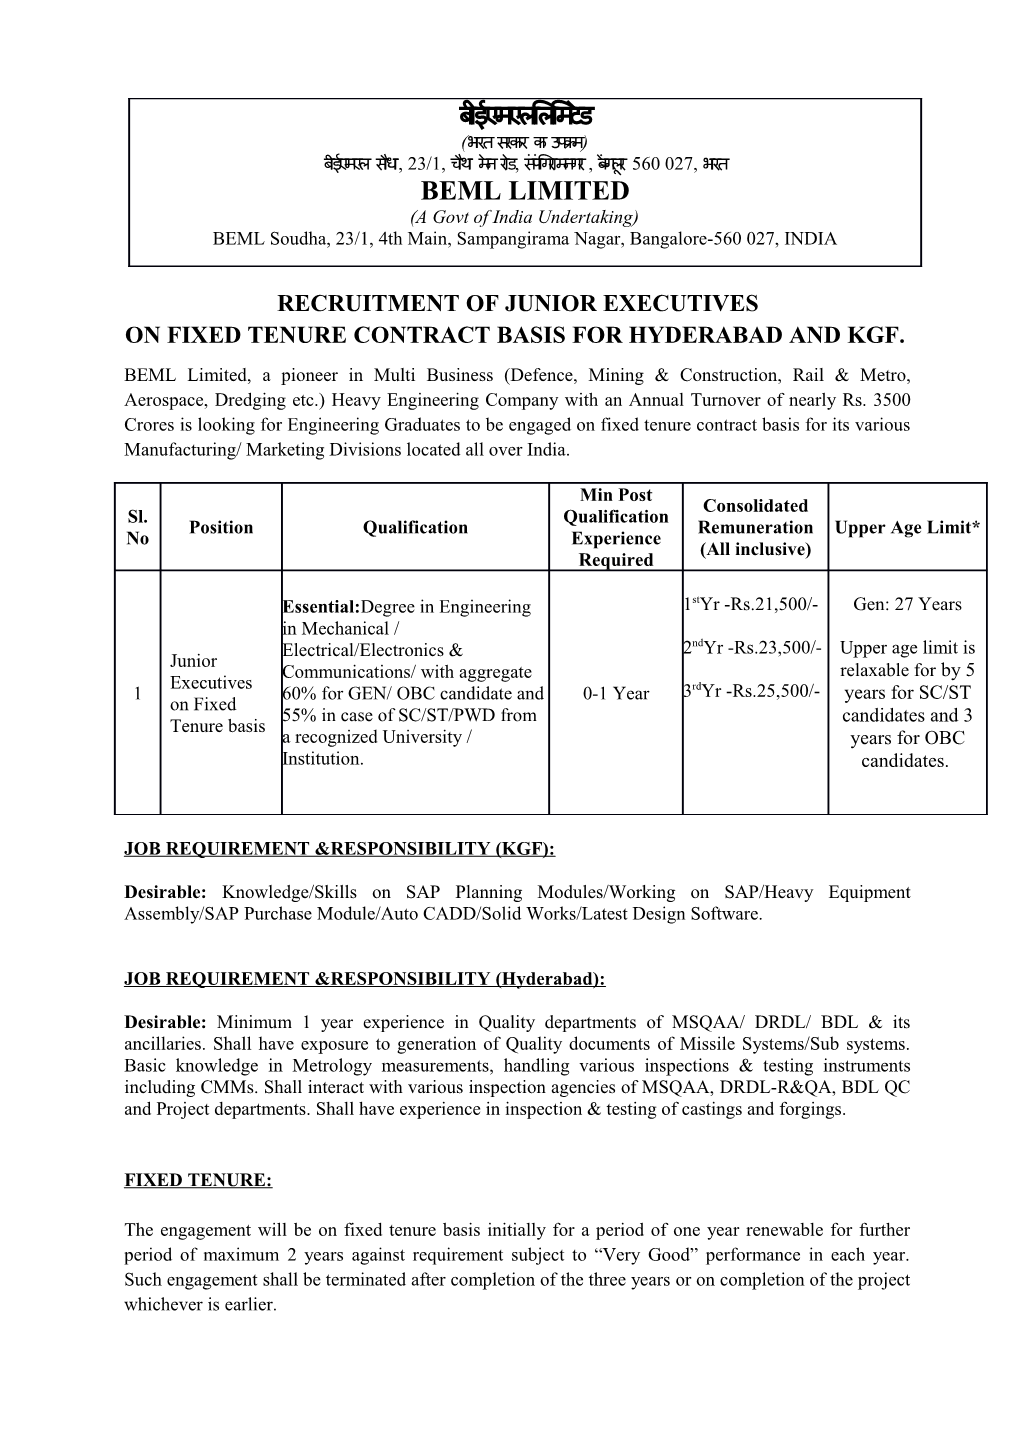 On Fixed Tenure Contract Basis for Hyderabad and Kgf